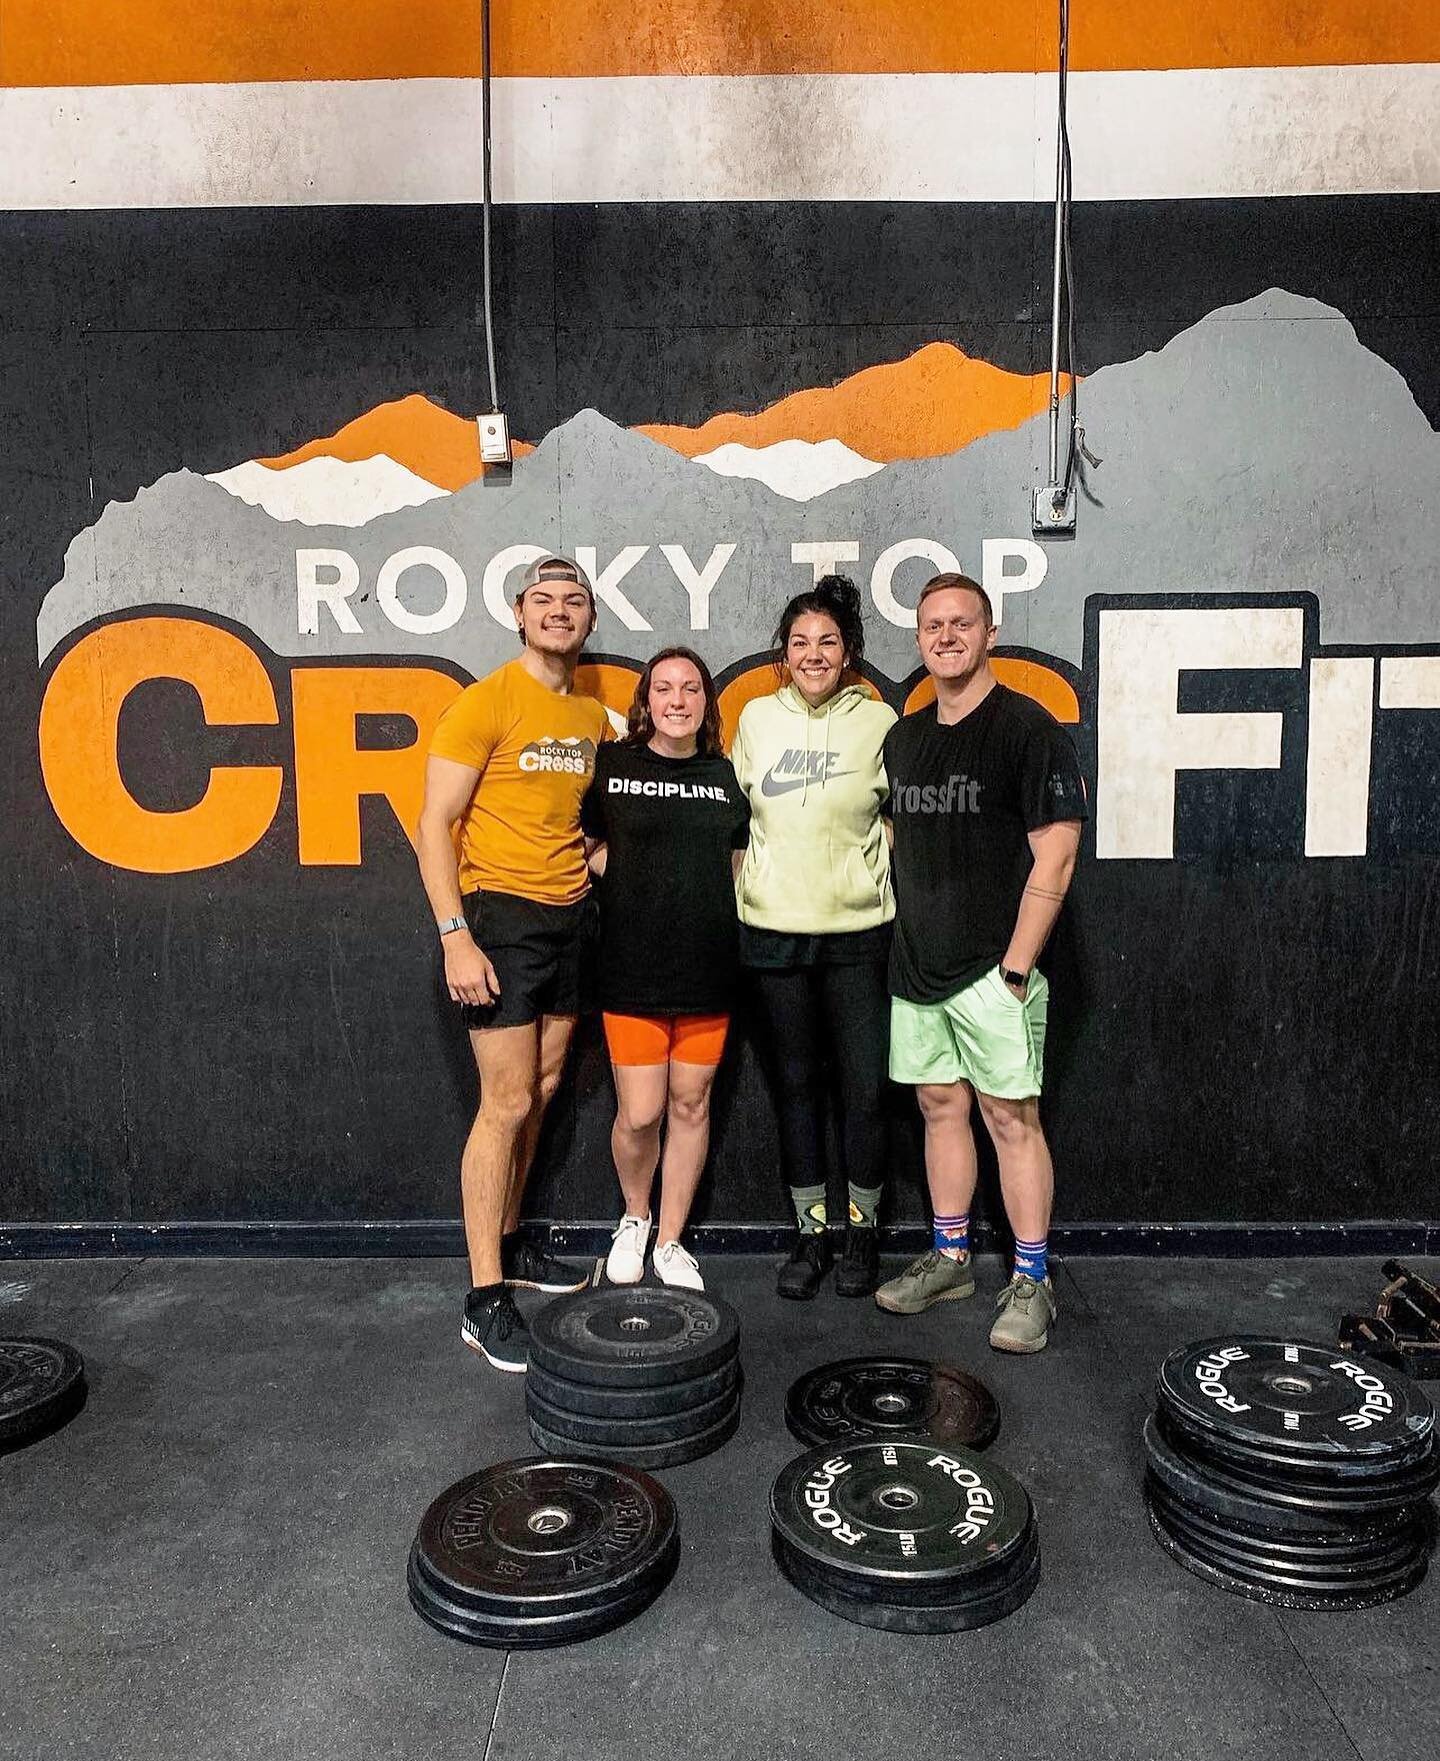 #repost from @njbowling 

#rtcffnl #rtcffam #crossfitopen #functionaltraining #knoxville #knoxvilletn #visitknoxville